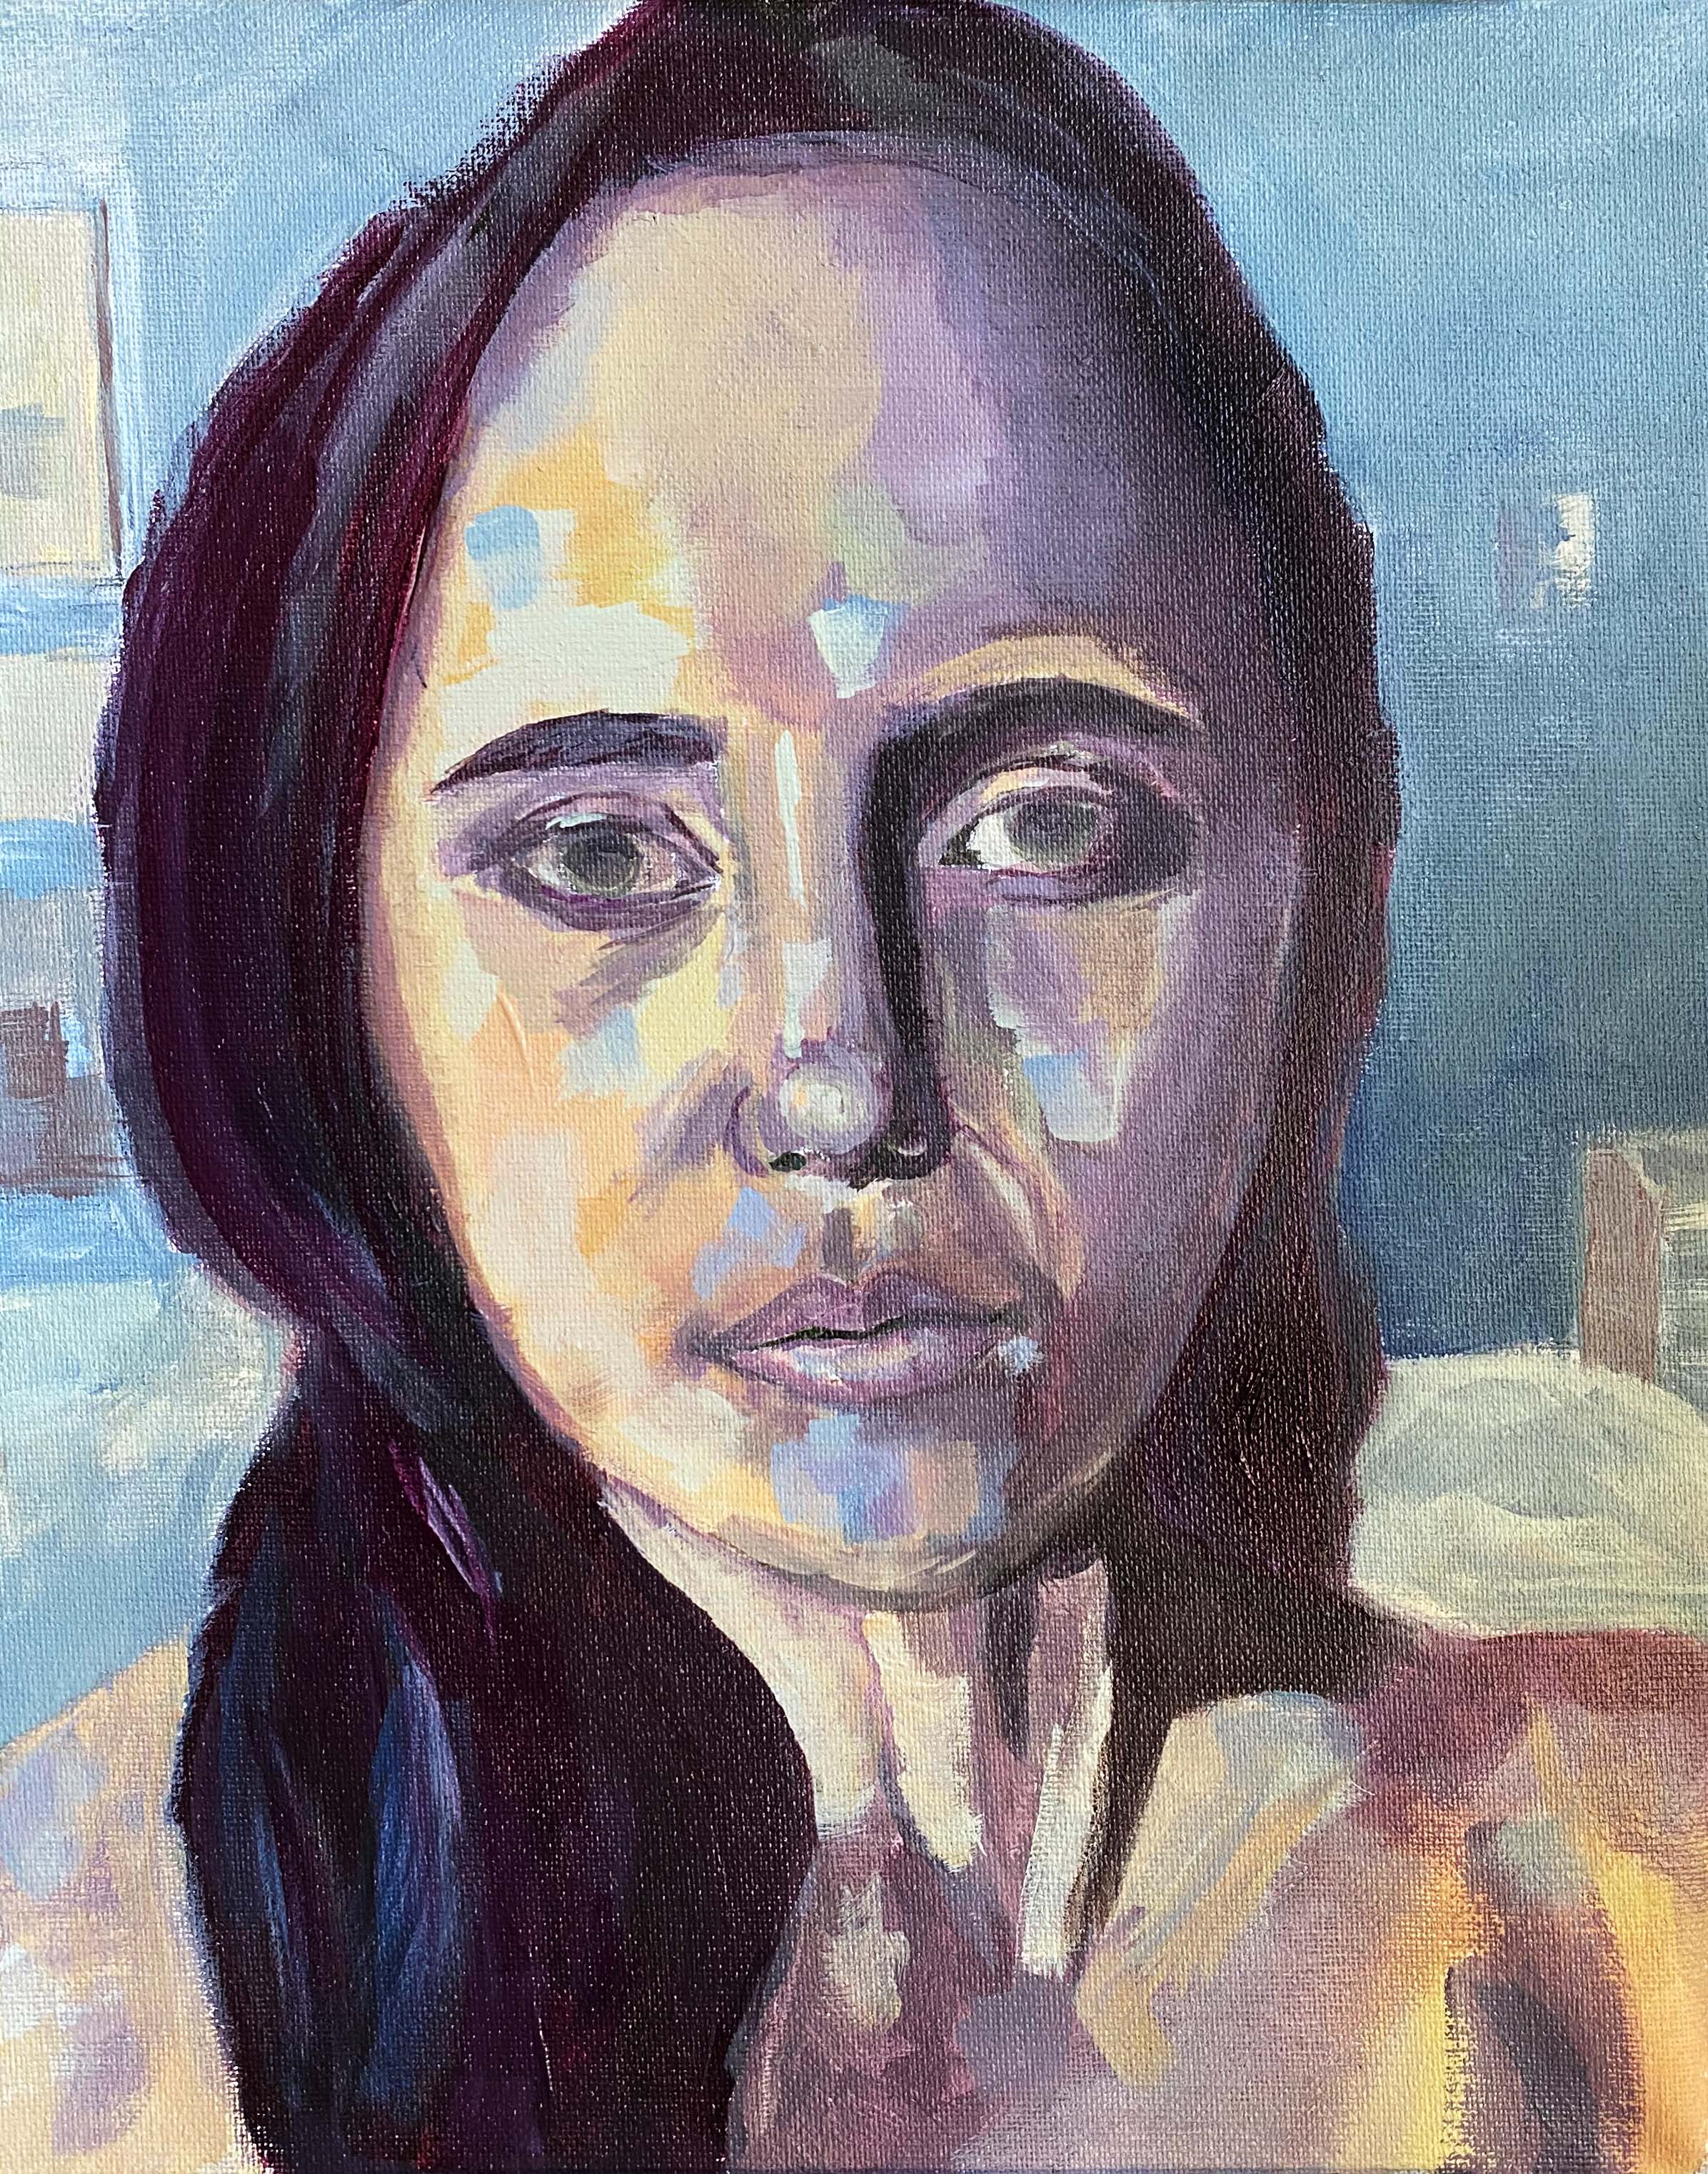 Blue and Apathy / Acrylic on Canvas / 11 x 14 inches / 2022